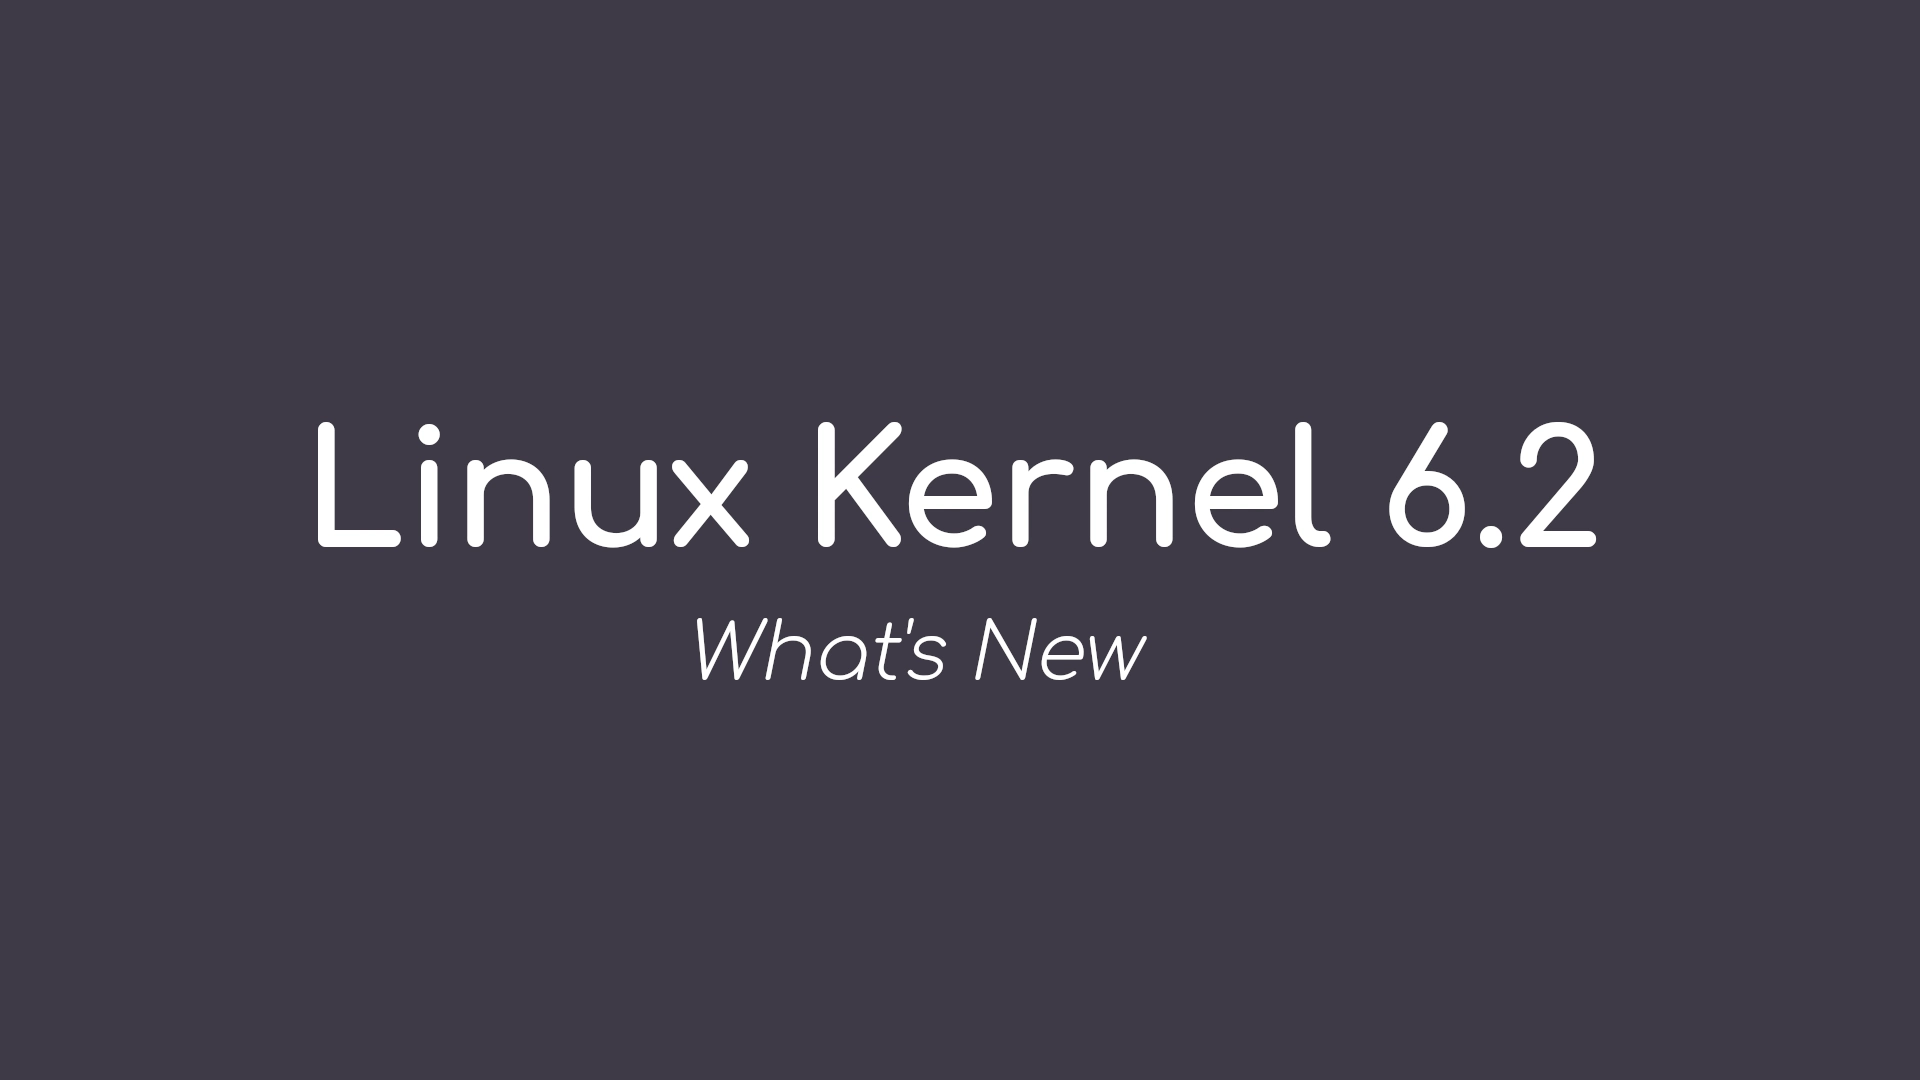 Linux Kernel 6.2 Officially Released, This Is What’s New